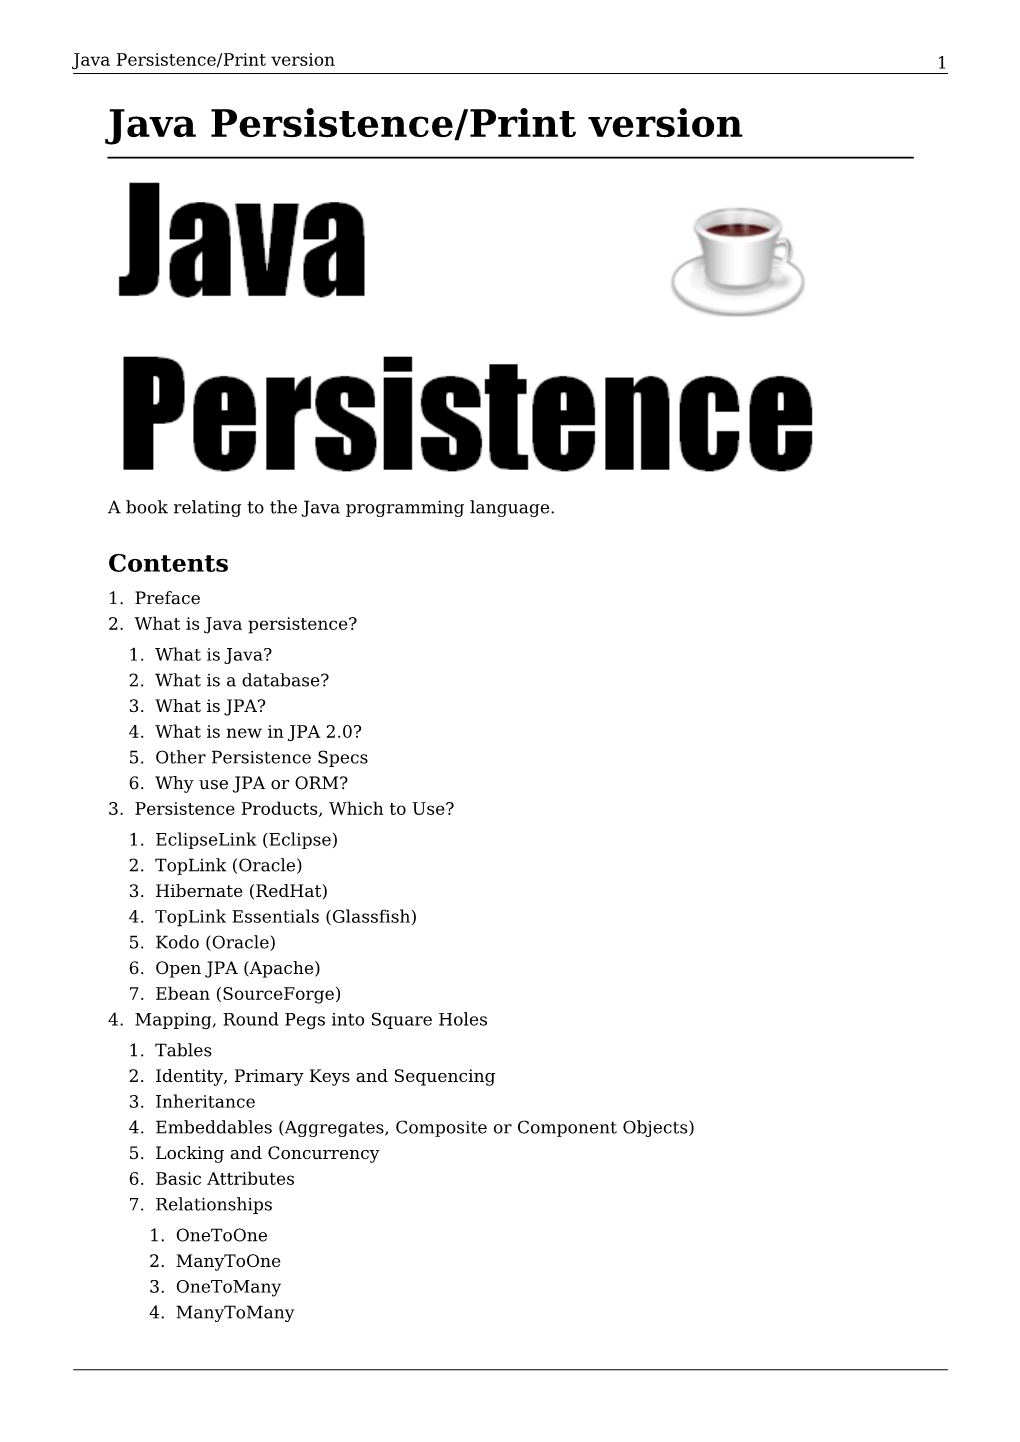 What Is Java Persistence? 1